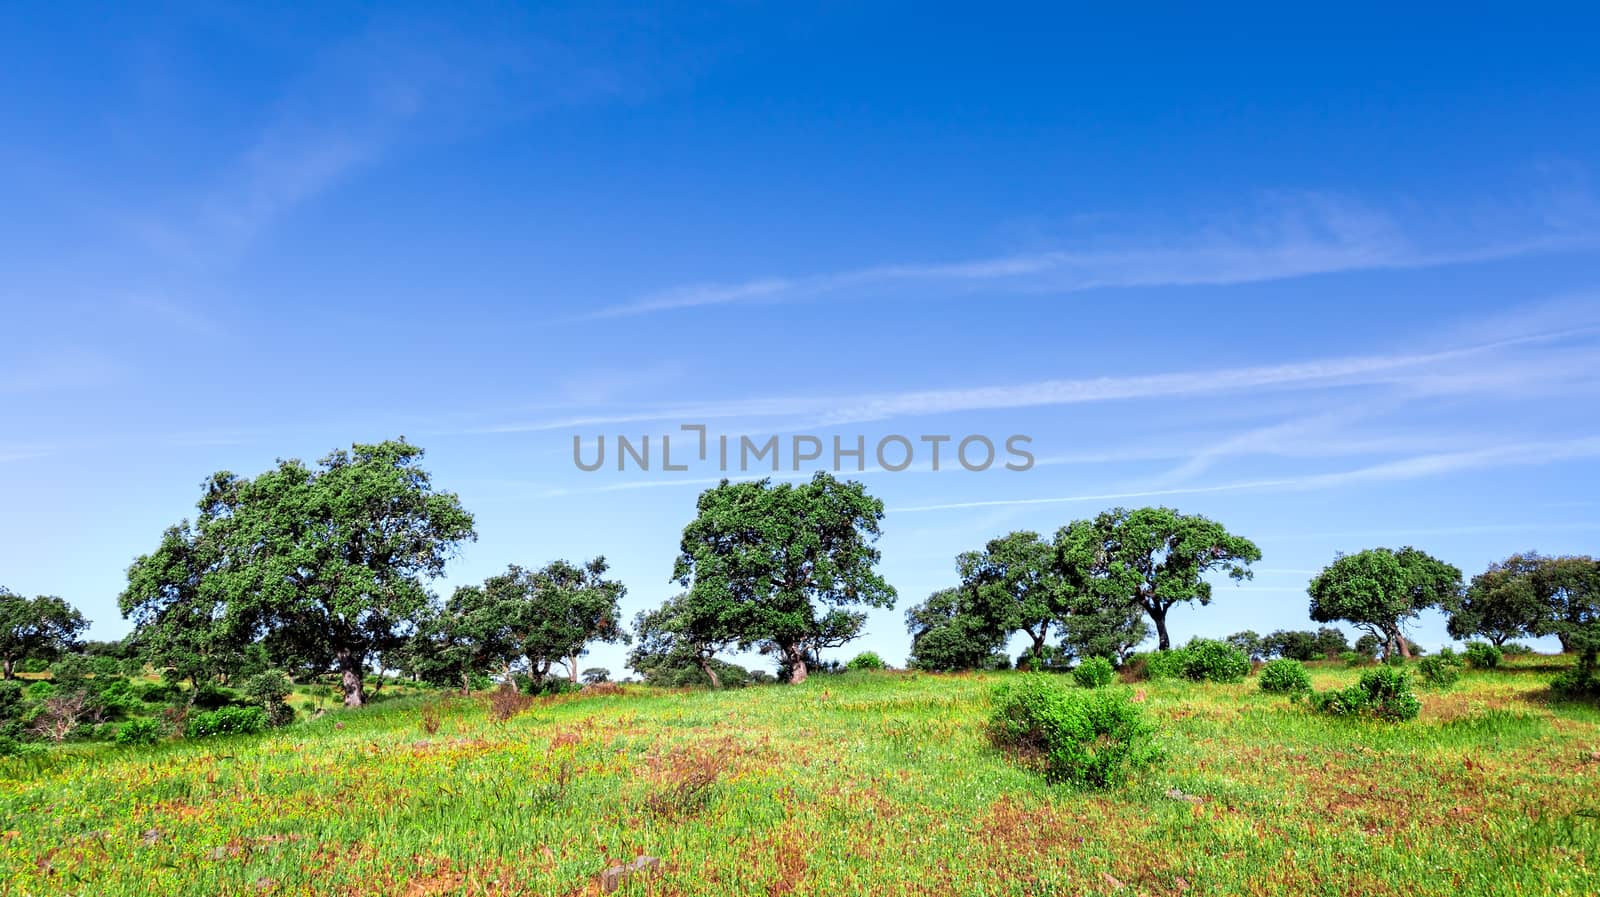 Green Grass Field Landscape with blue sky in the background